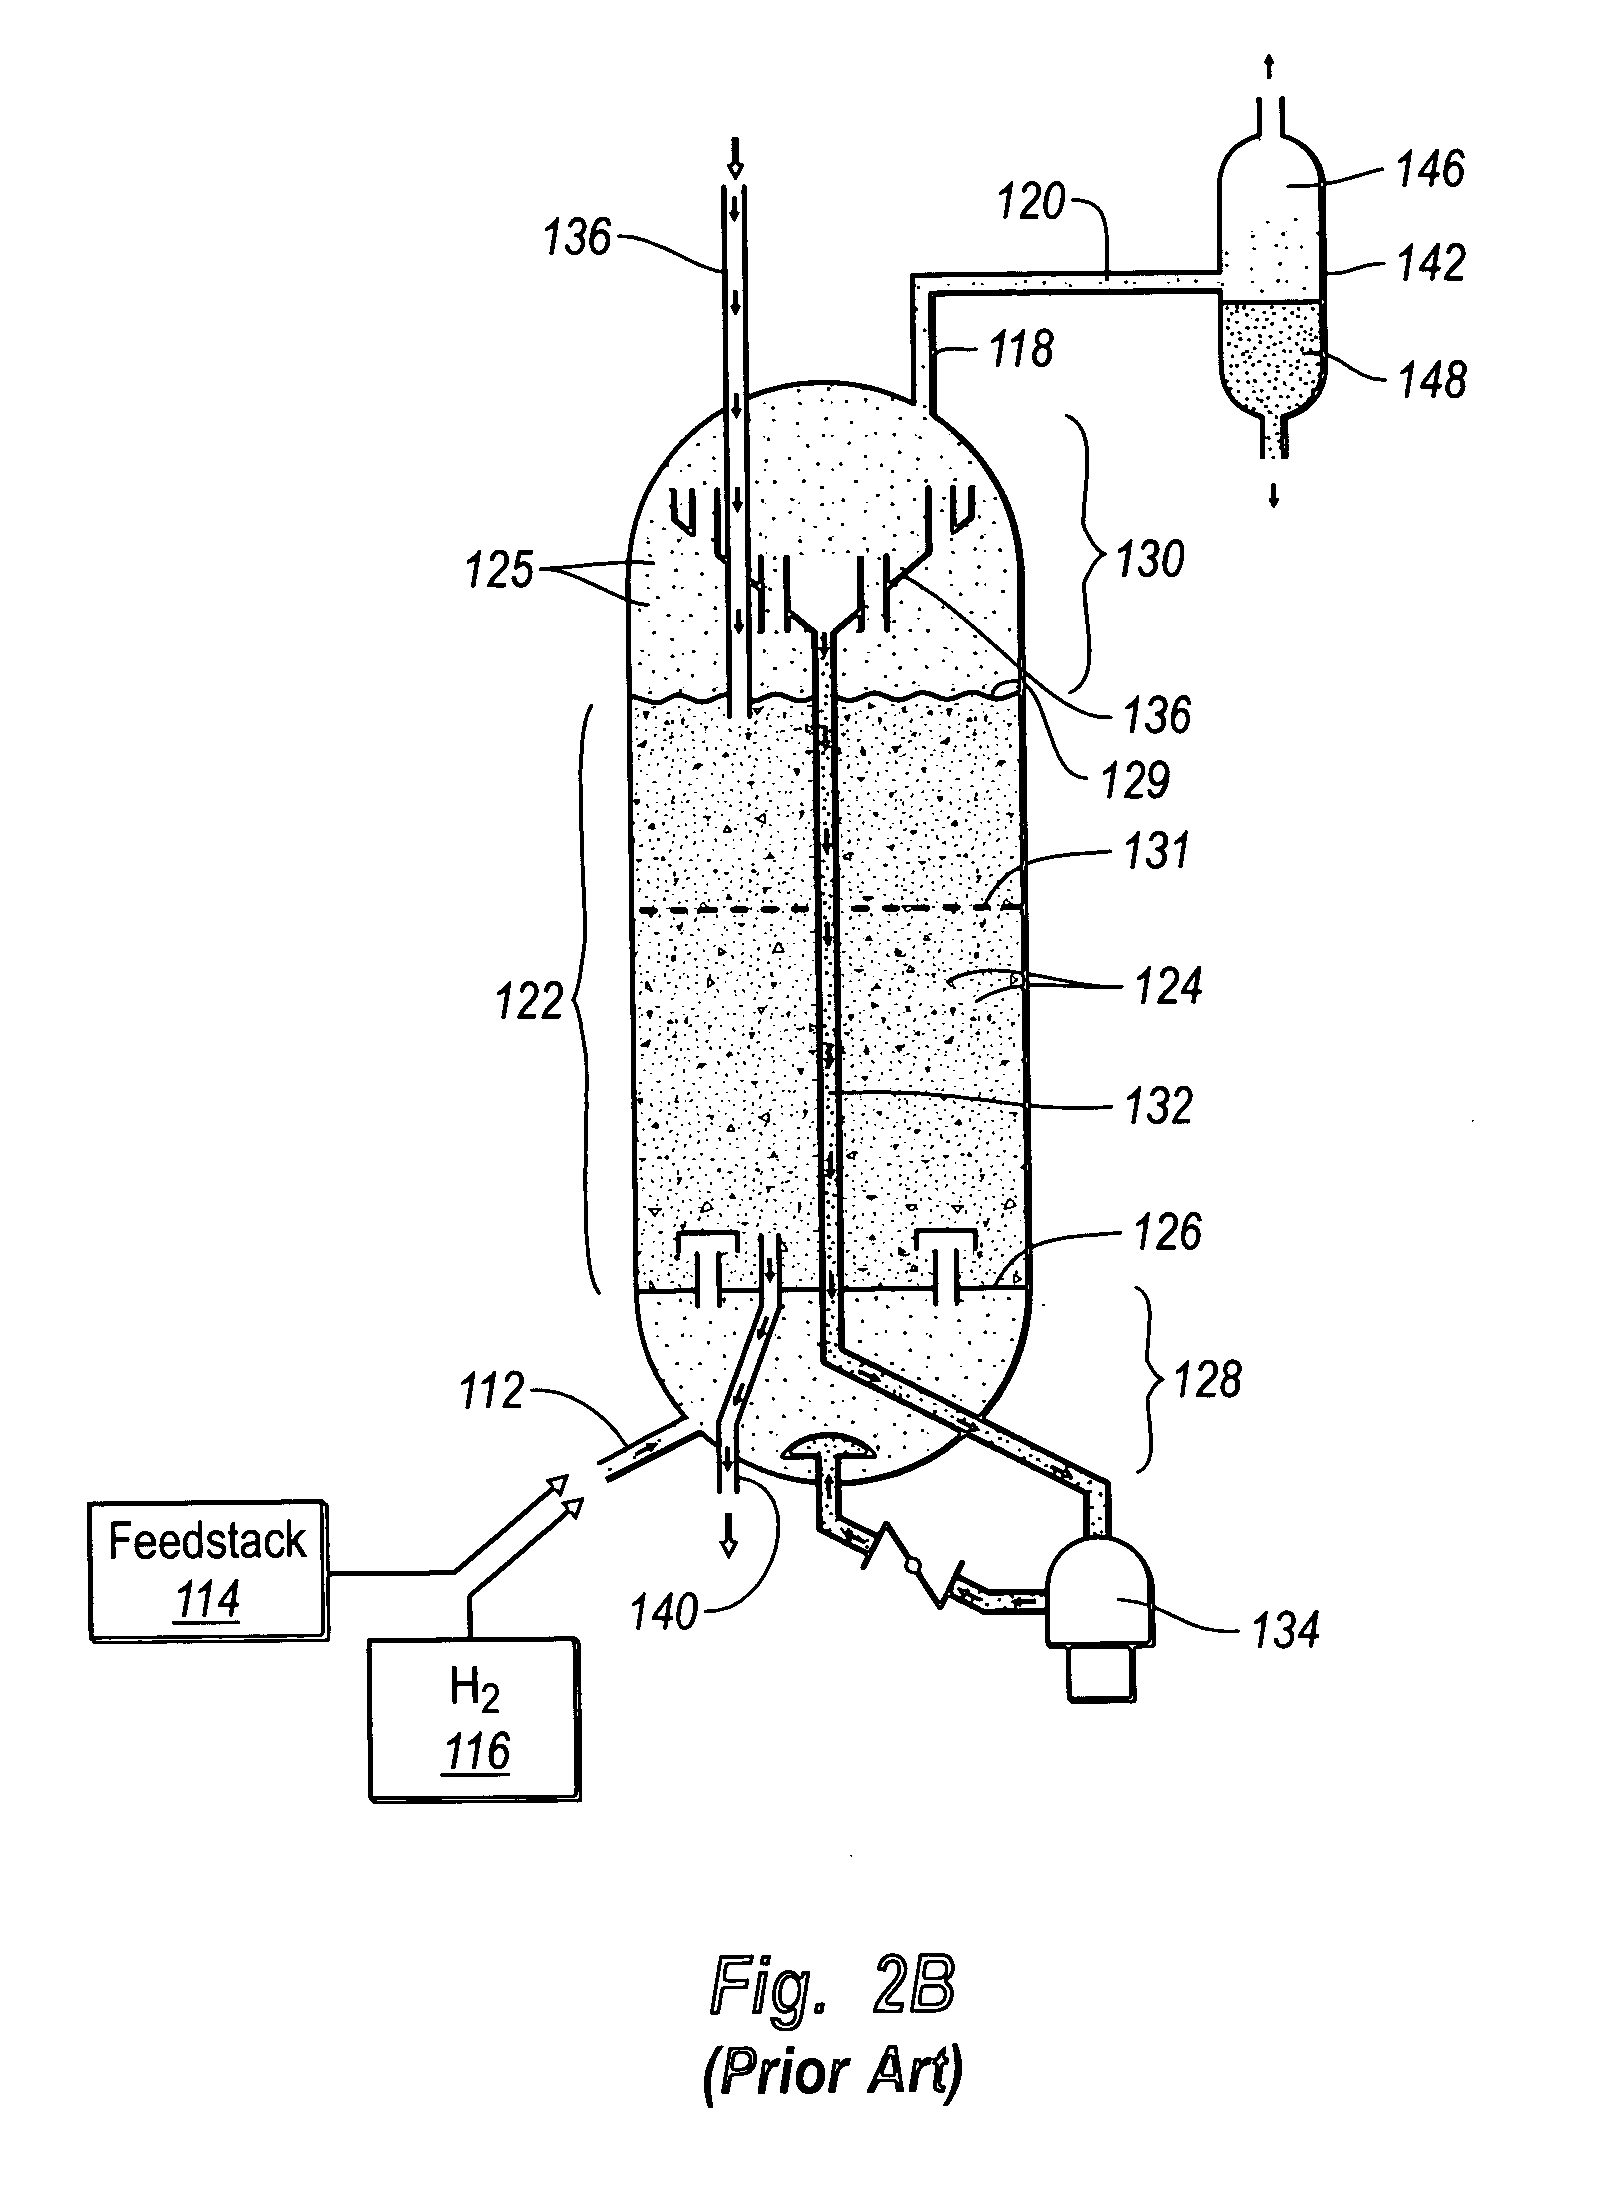 Ebullated bed hydroprocessing methods and systems and methods of upgrading an existing ebullated bed system